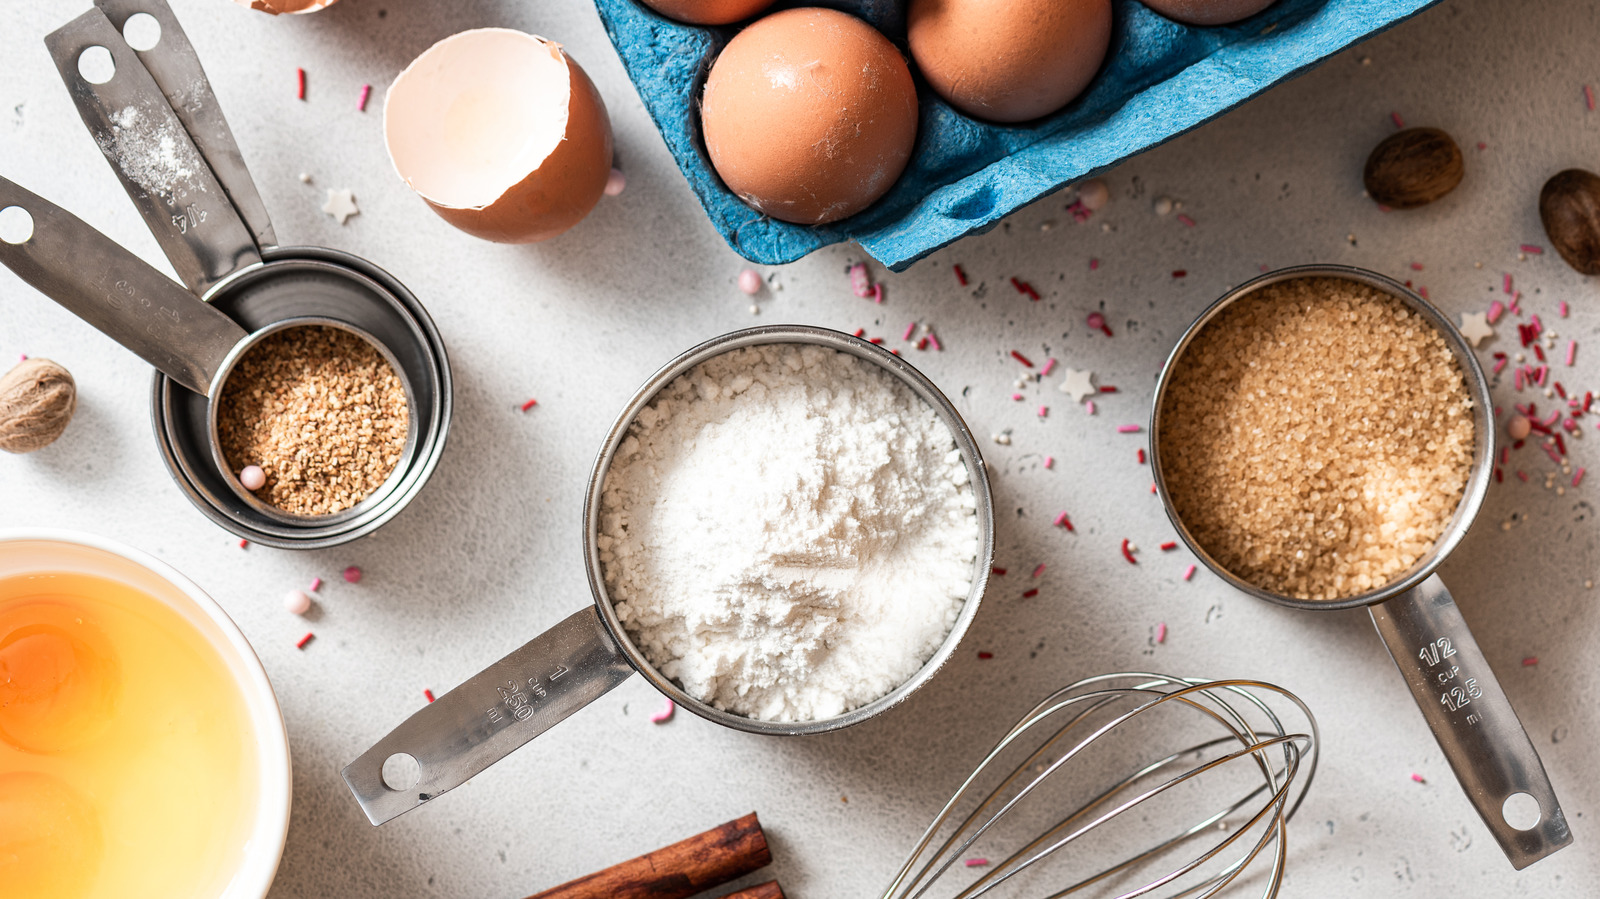 America's Test Kitchen - We've tested using dry and liquid measuring cups  interchangeably, and the results are clear: For the best and most accurate  results, you should use liquid measuring cups to